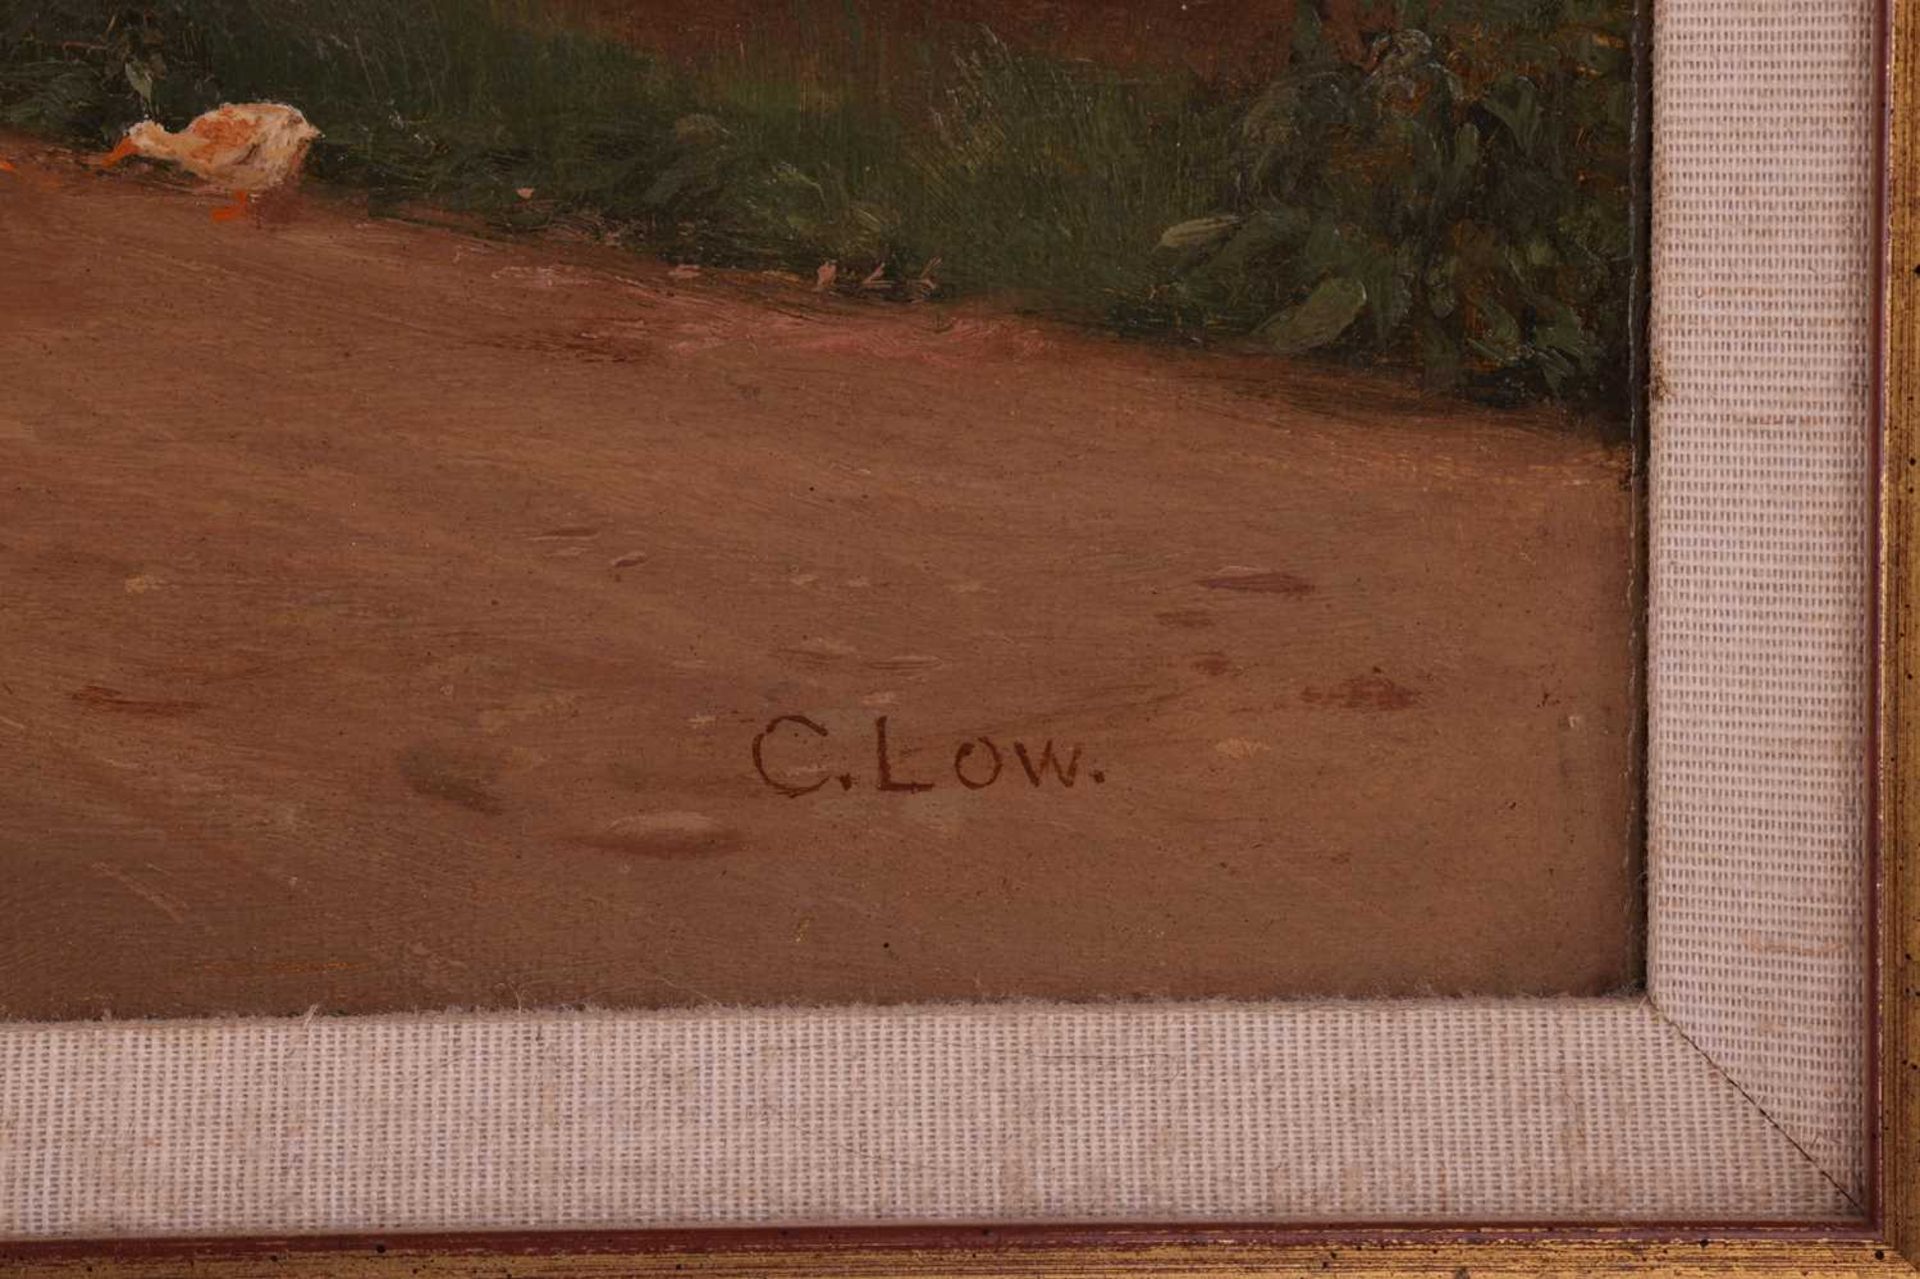 Charles Low (1840 - 1906), The Village Ford, Eashing, Surrey, signed, oil on canvas, 32.5 x 49 cm, f - Image 5 of 8